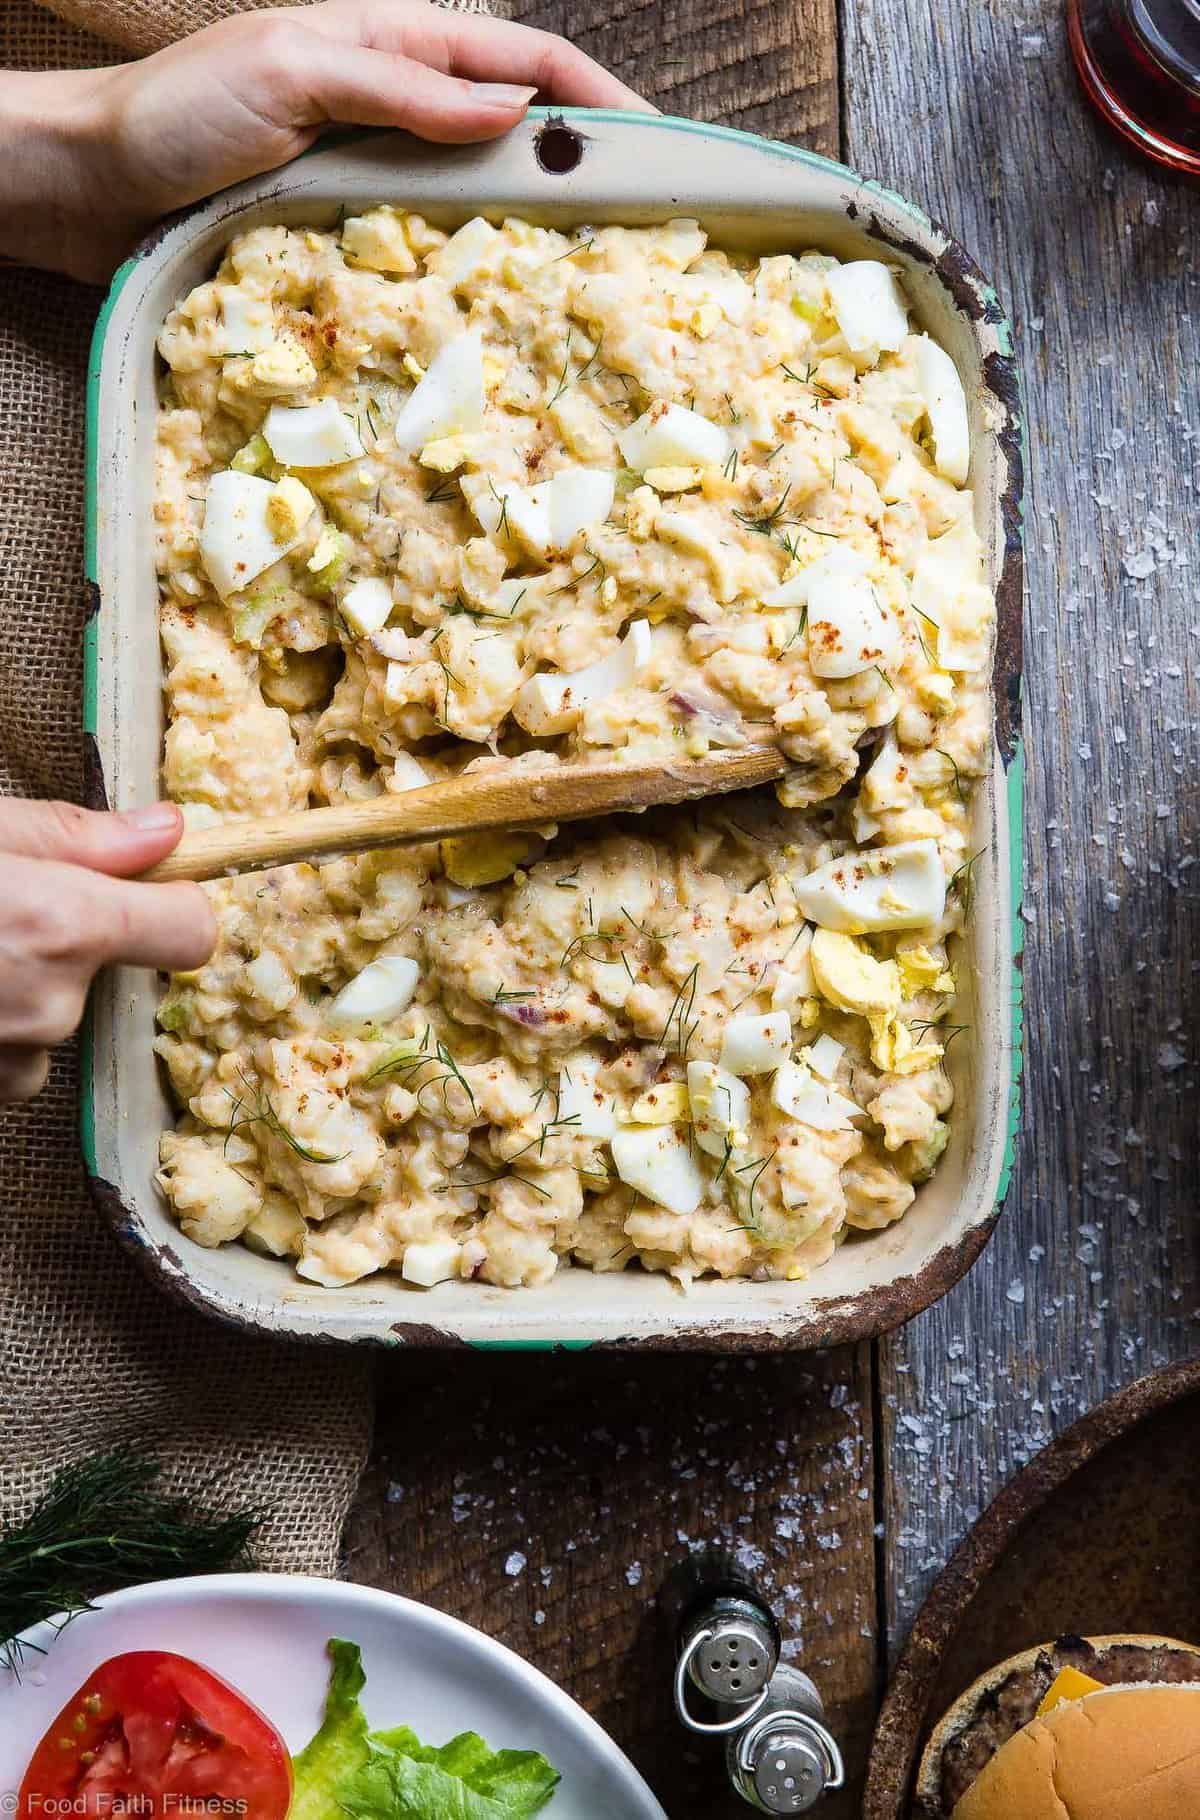 Cauliflower Potato Salad being scooped out of serving dish with wooden spoon